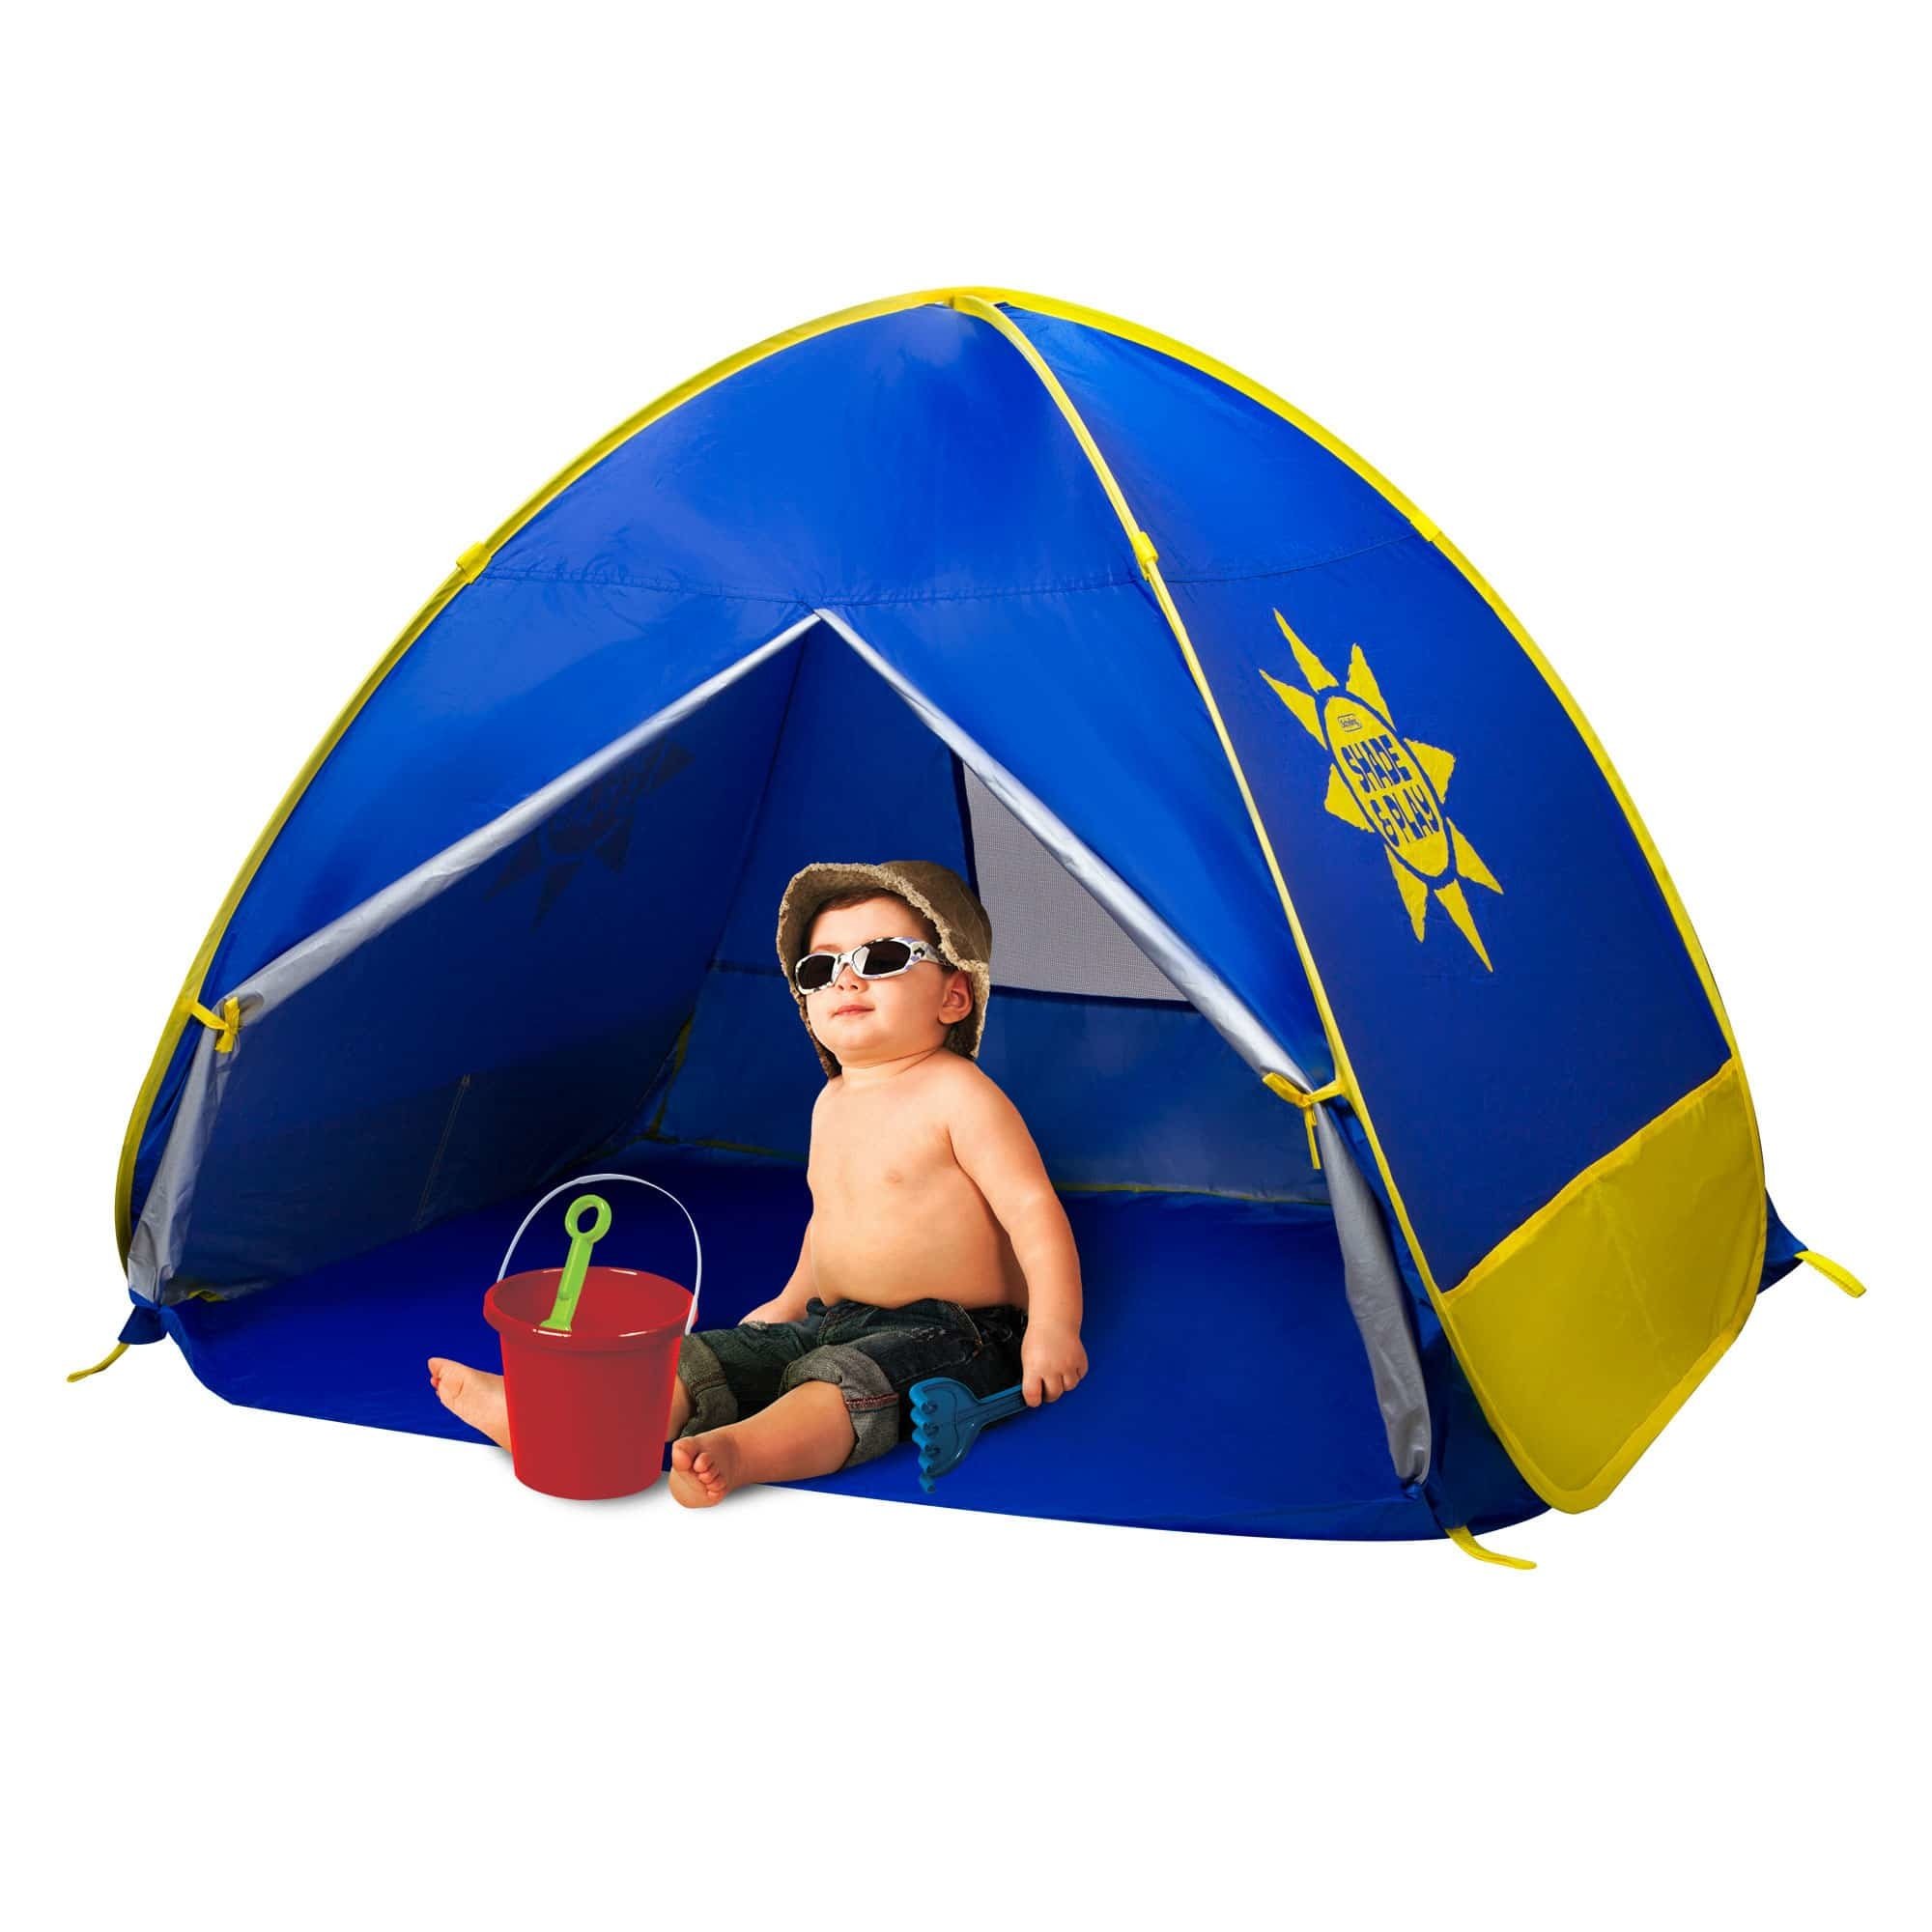 Schylling Infant Play Shade Pop Up Tent